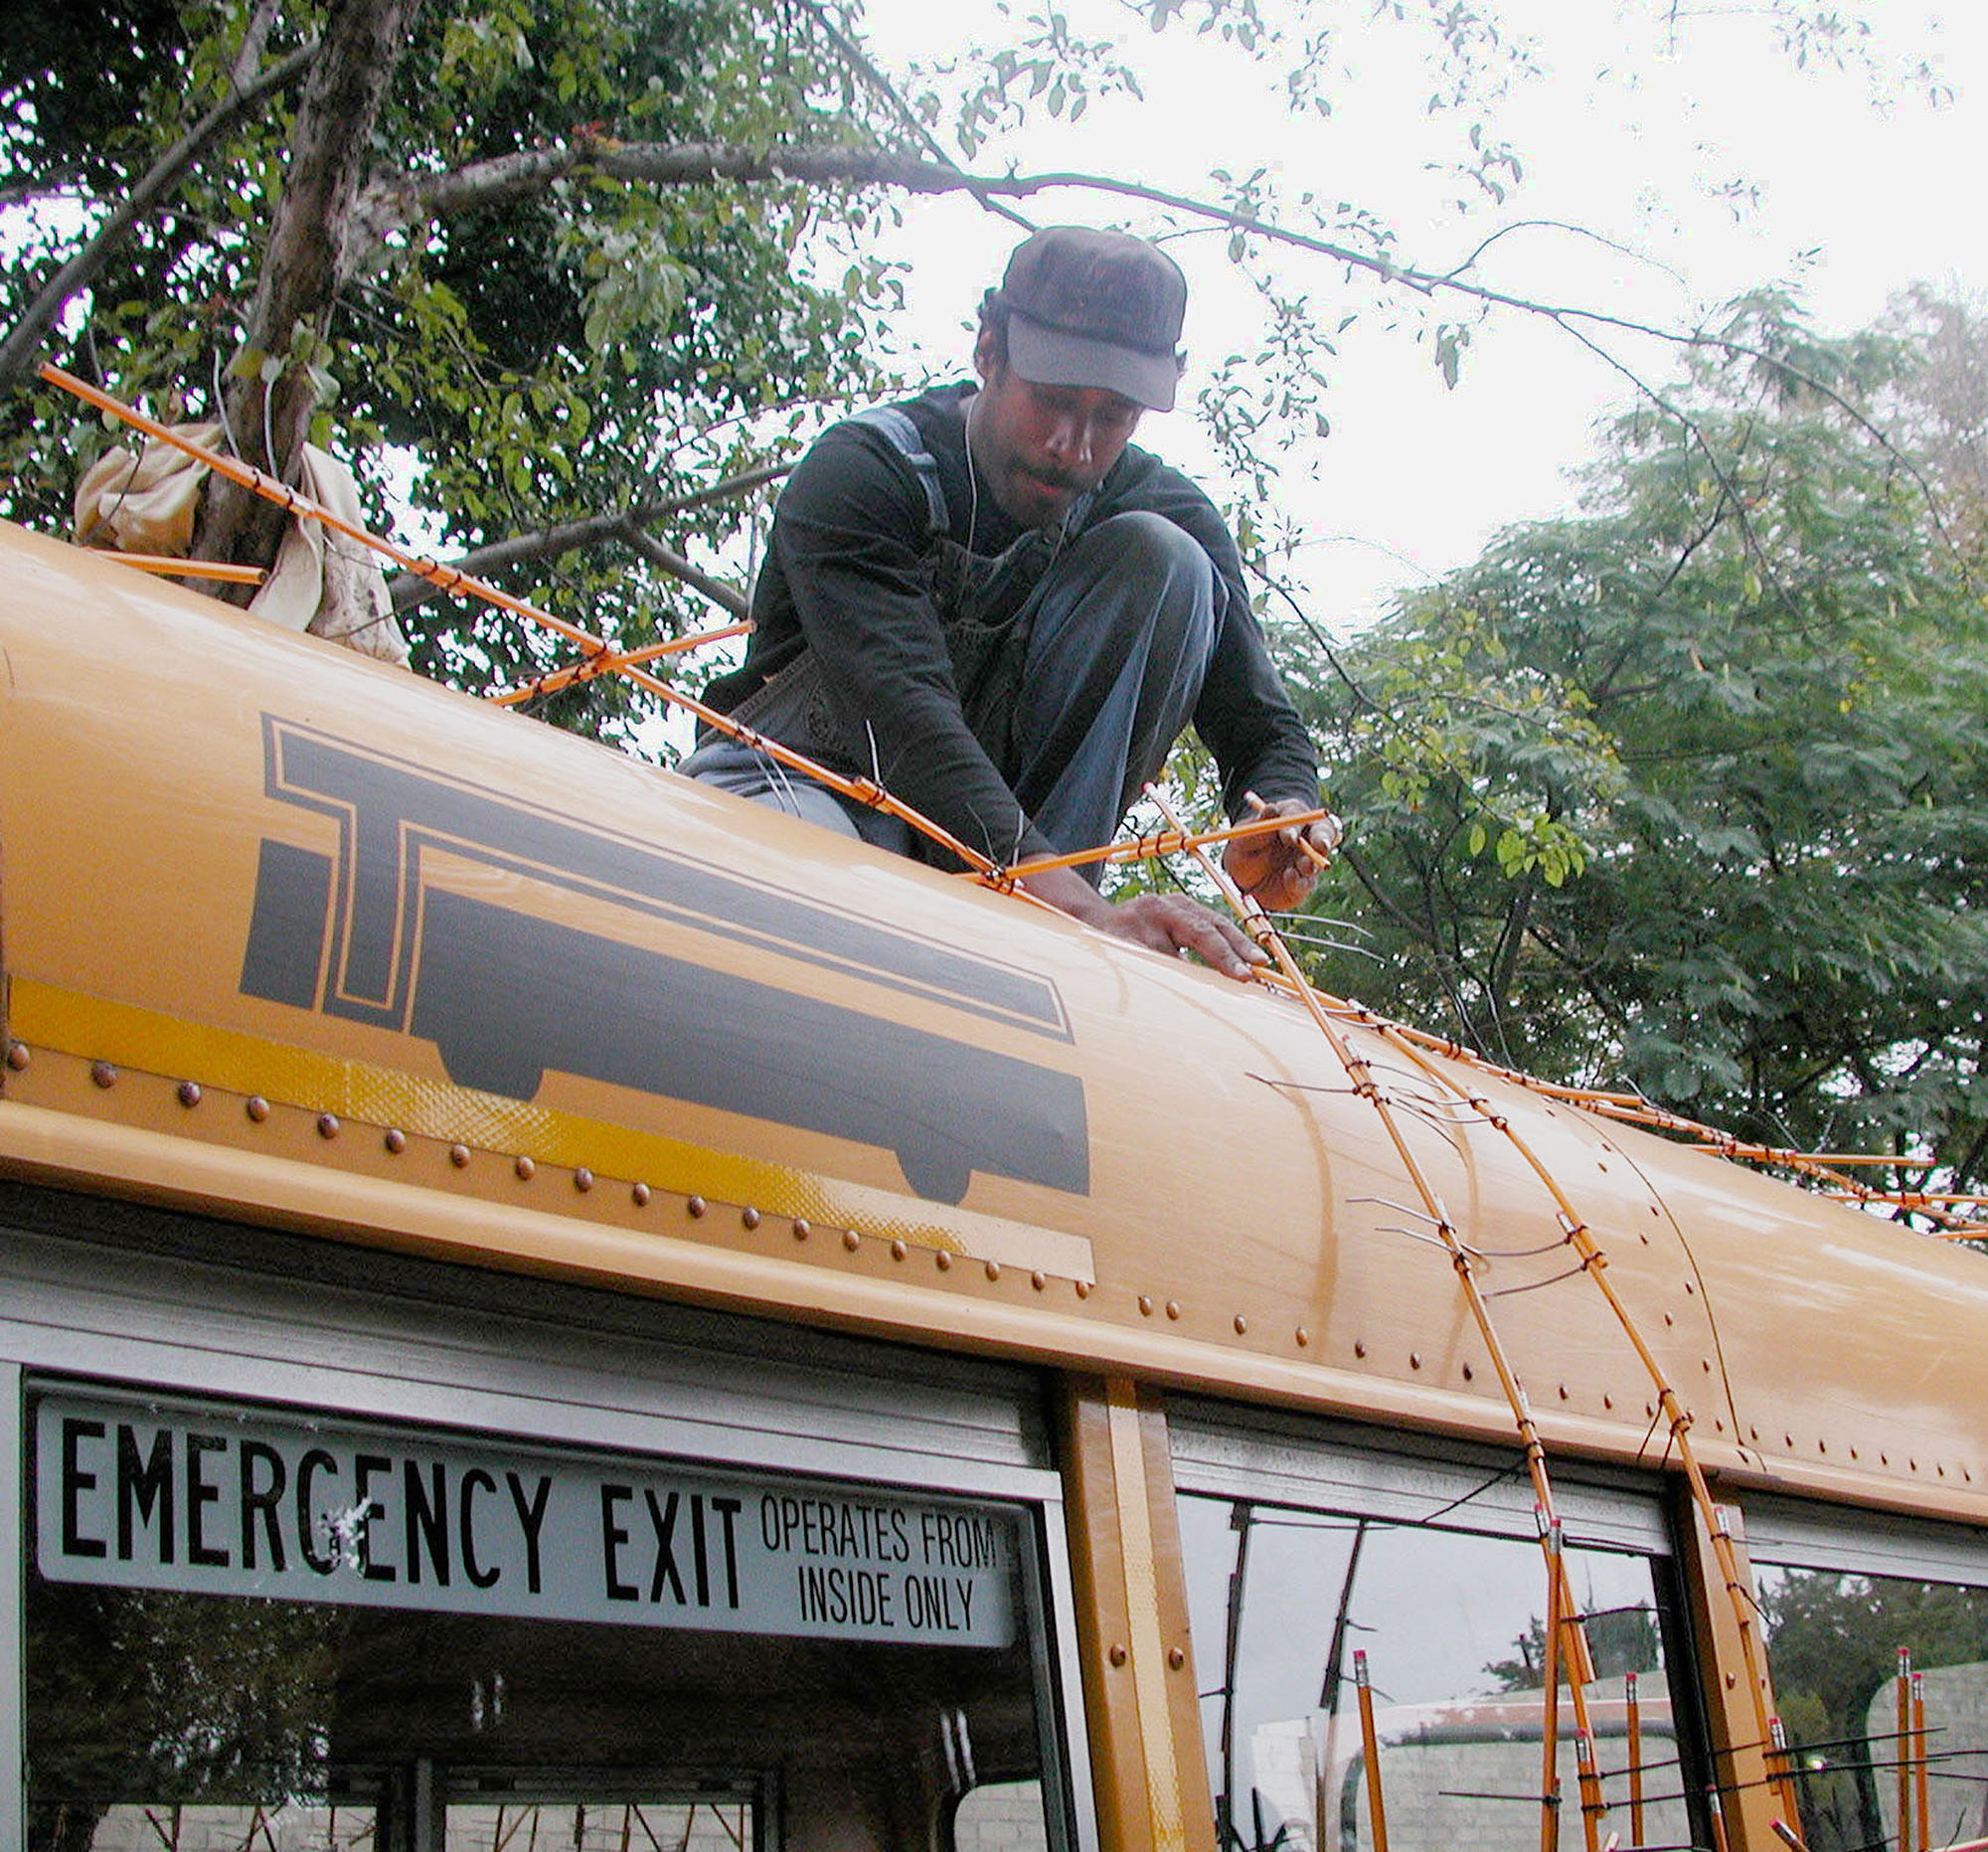 Artist Nari Ward on top of a yellow school bus  constructing a bramble of pencils and zipties.